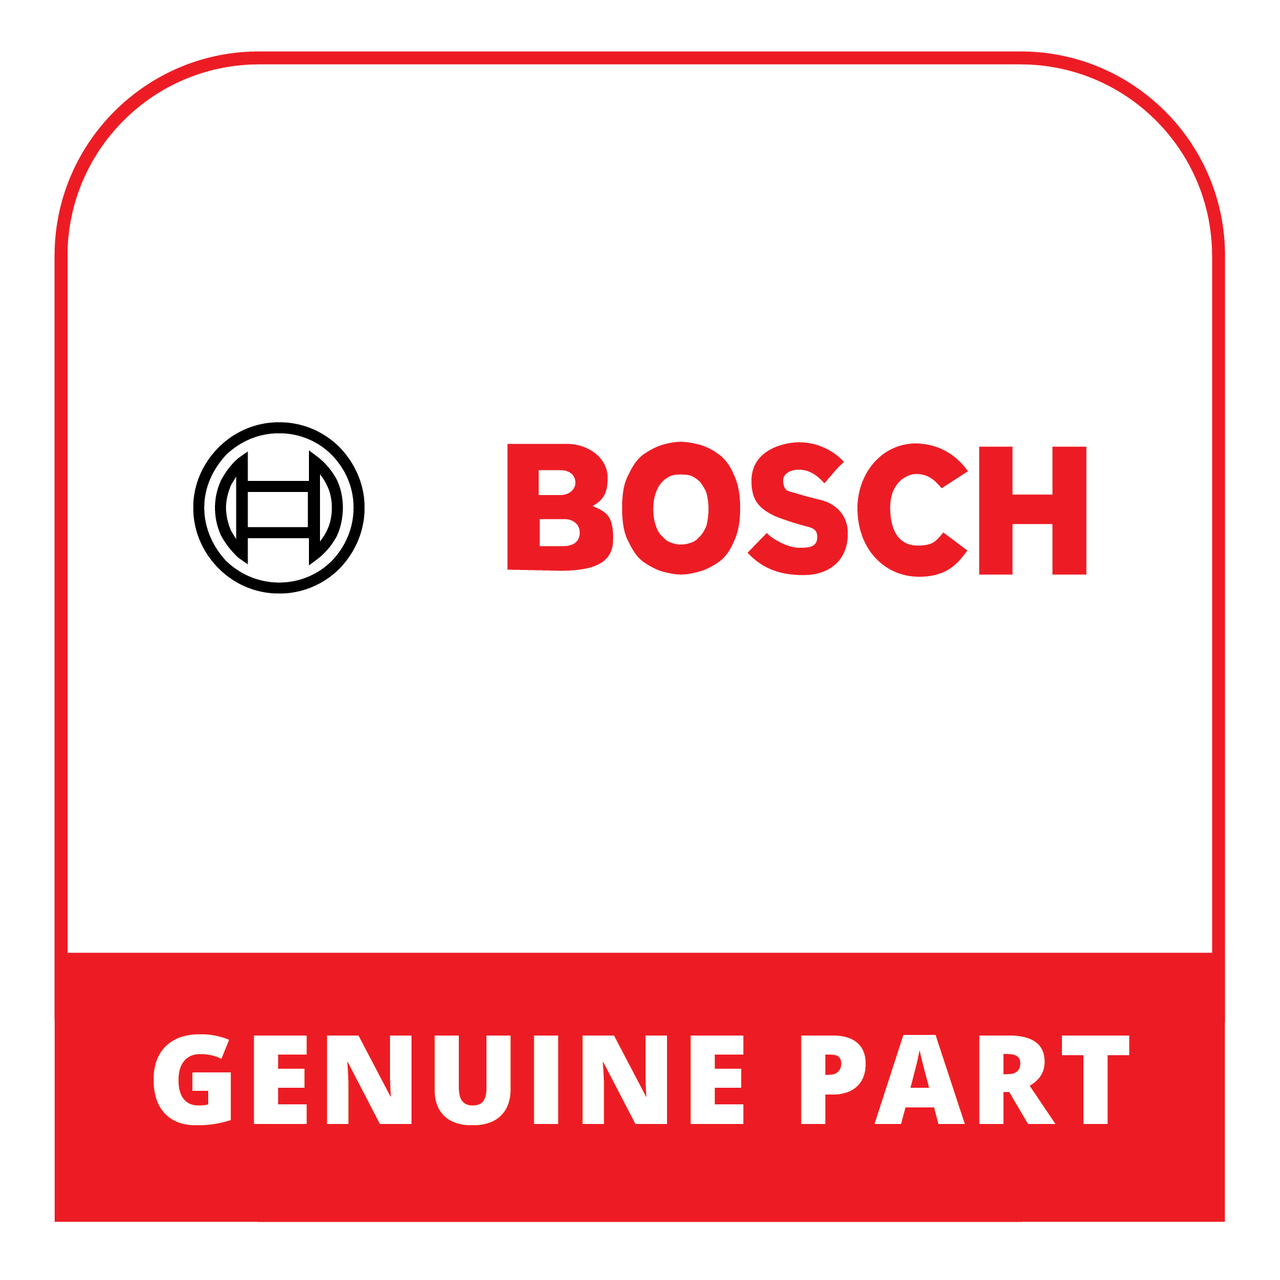 Bosch 00248749 - Cover - Genuine Bosch (Thermador) Part